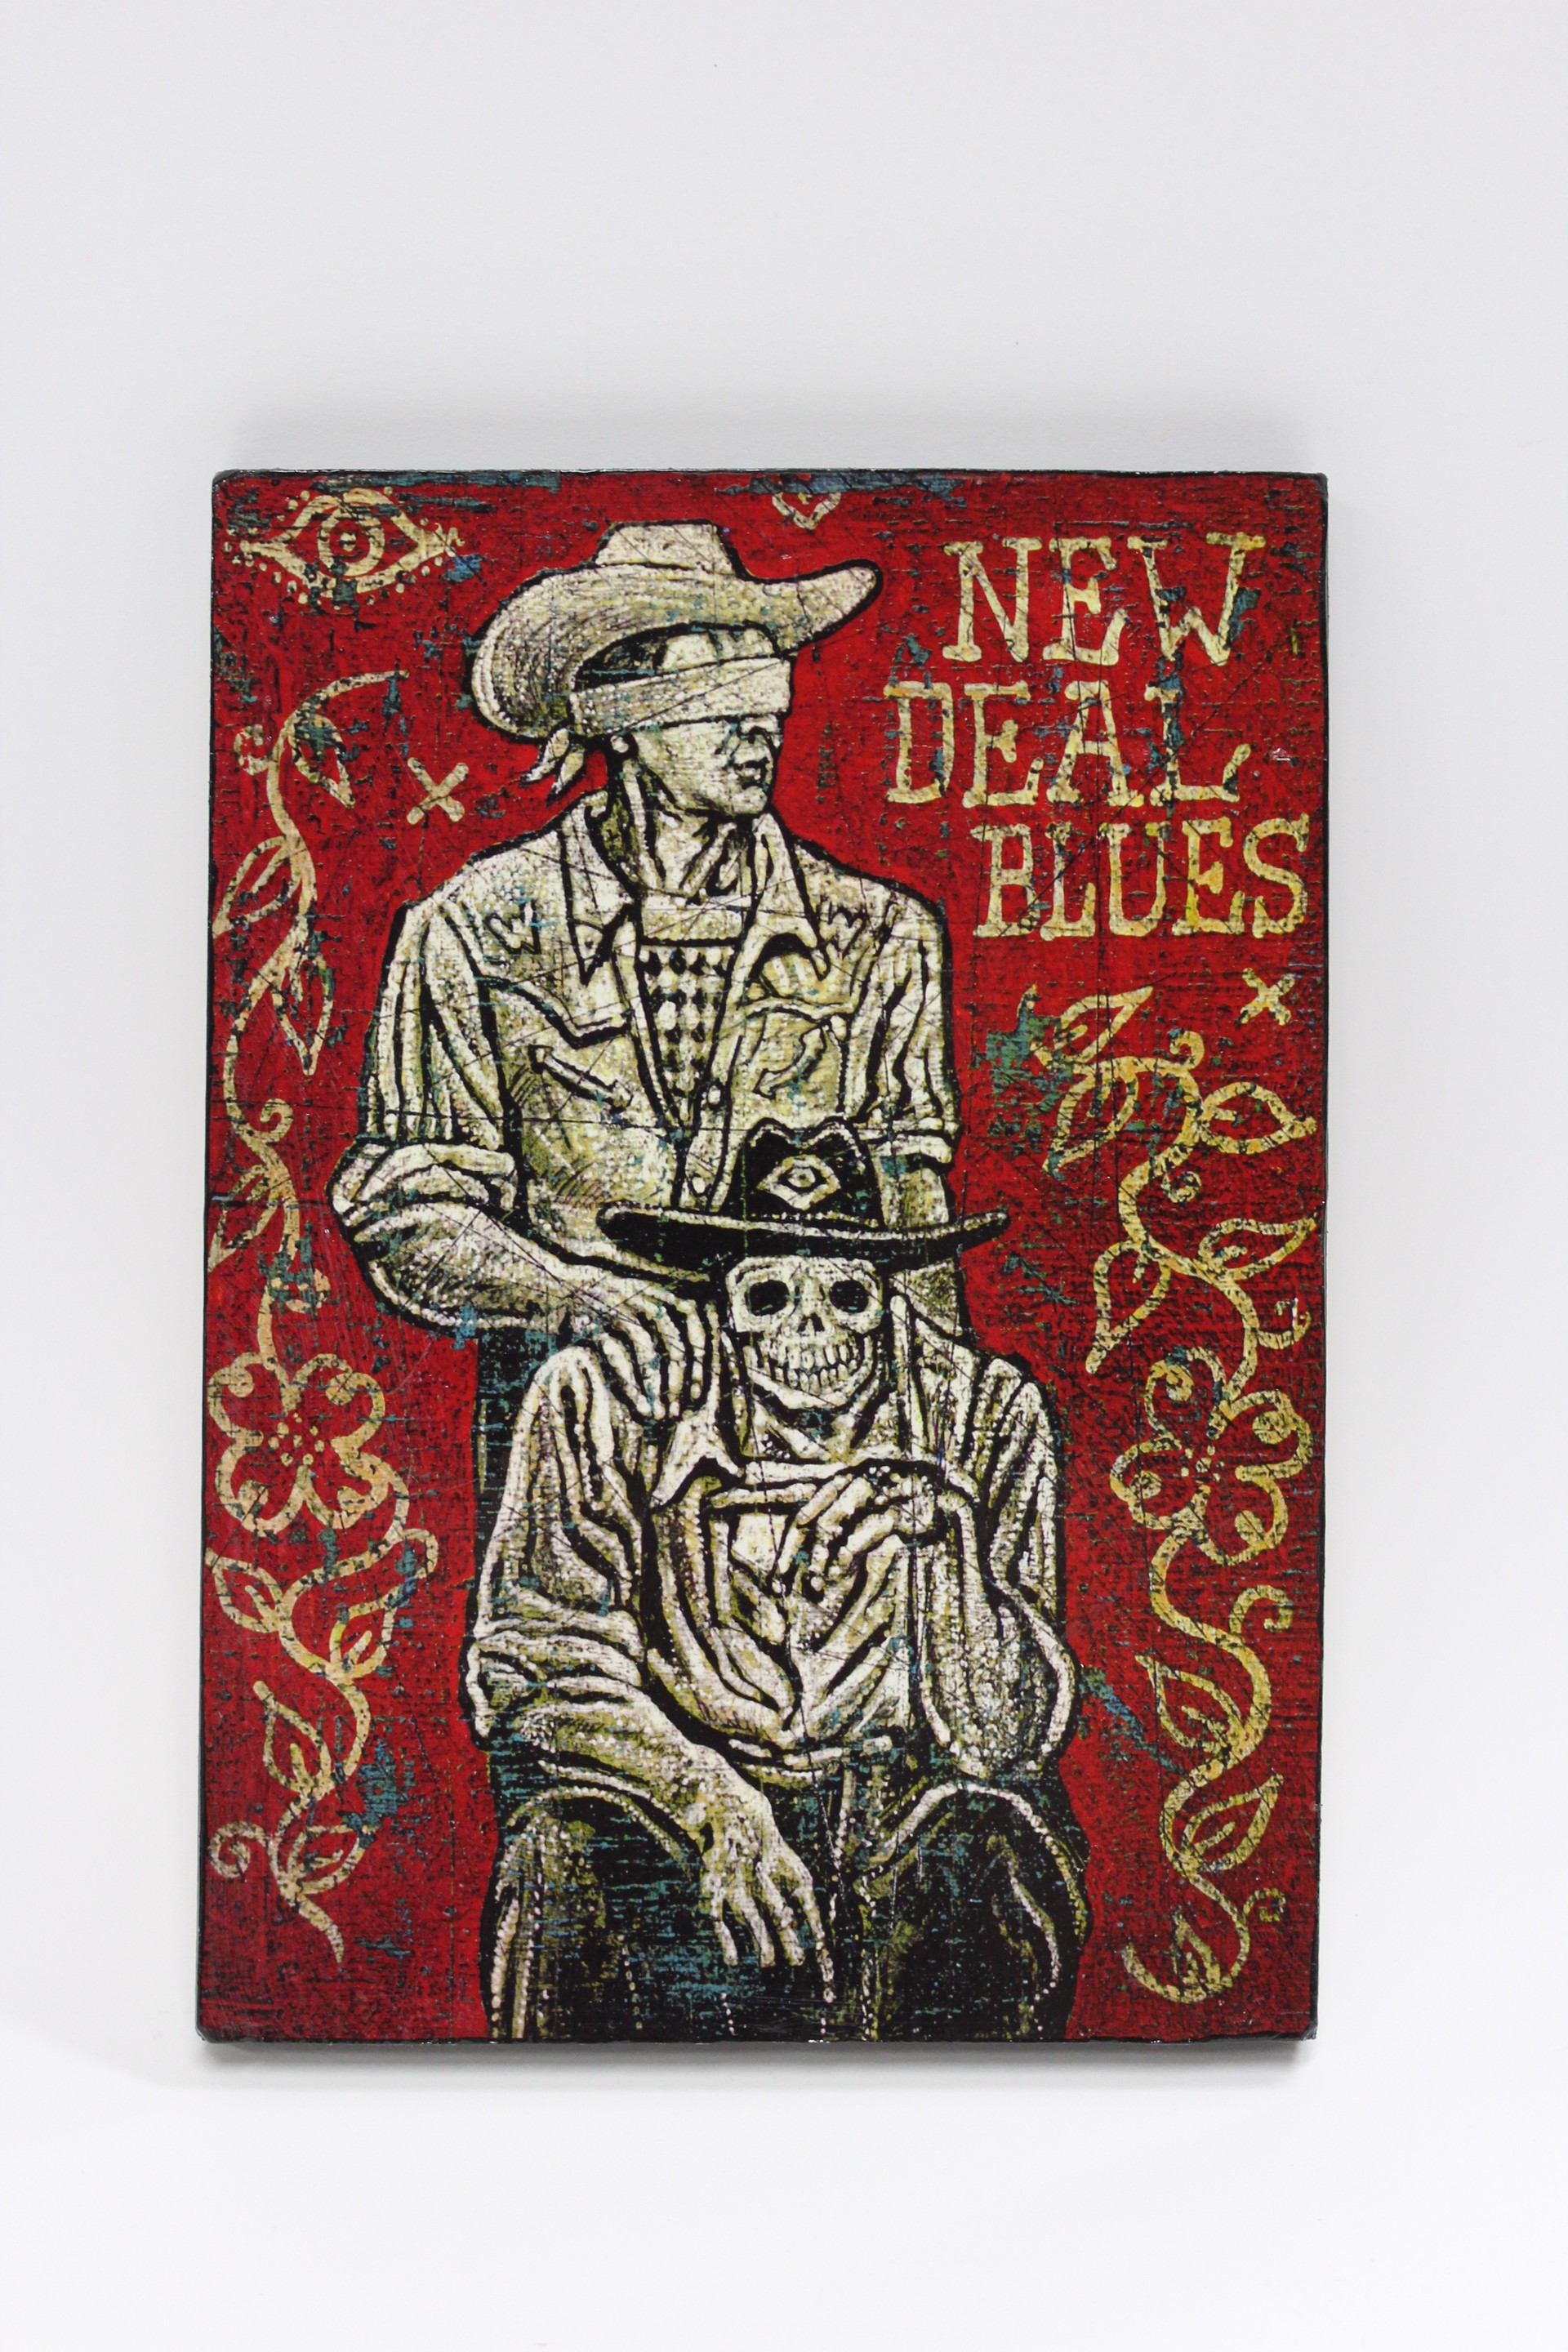 New Deal Blues by Jon Langford